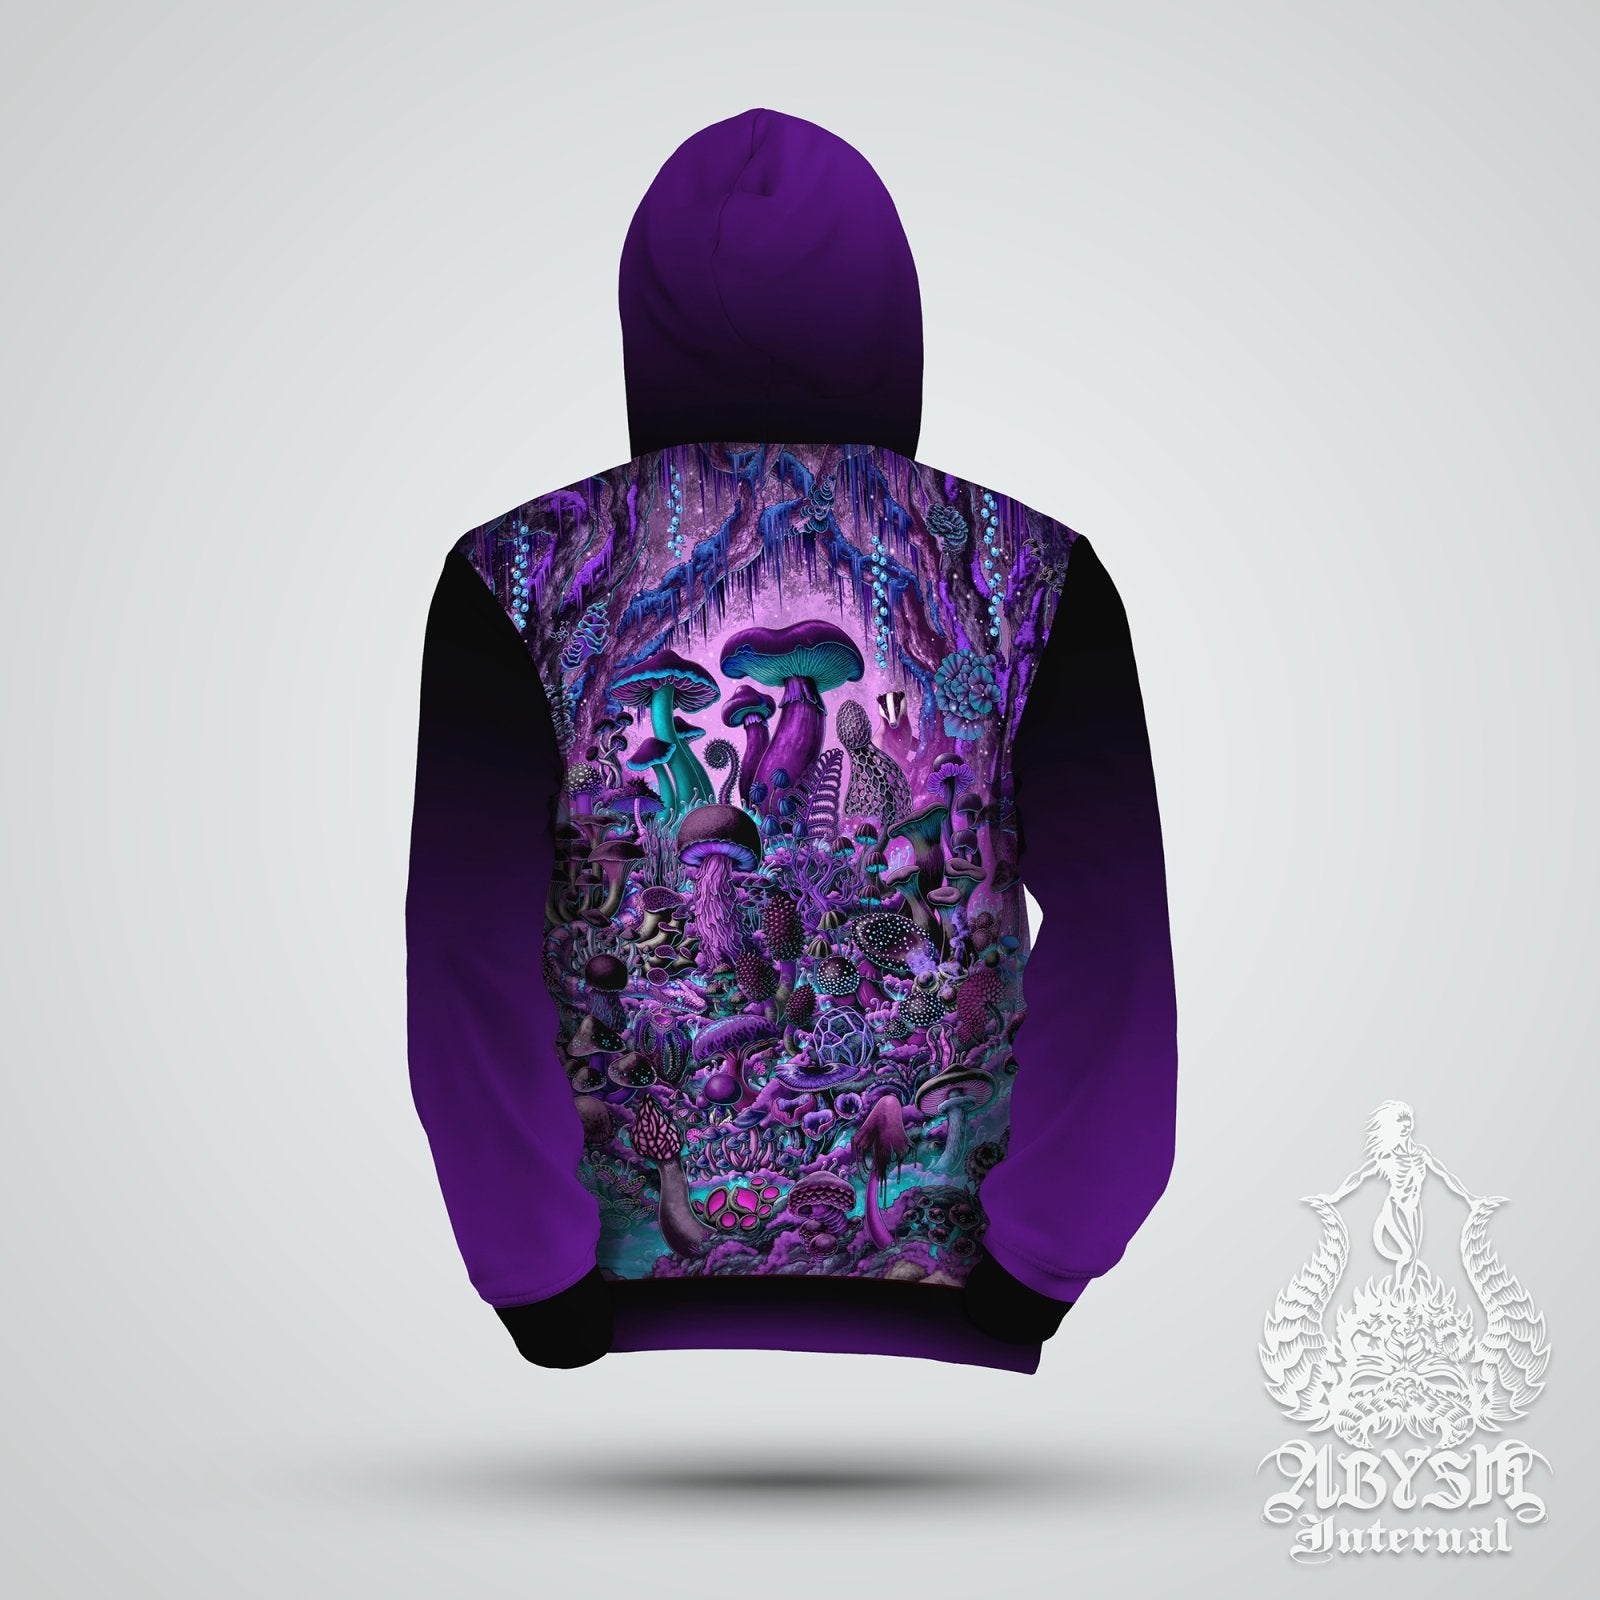 Gothic Mushrooms Hoodie, Pastel Goth Festival Streetwear, Witchy Outfit, Magic Shrooms, Alternative Clothing, Unisex - Black and purple - Abysm Internal